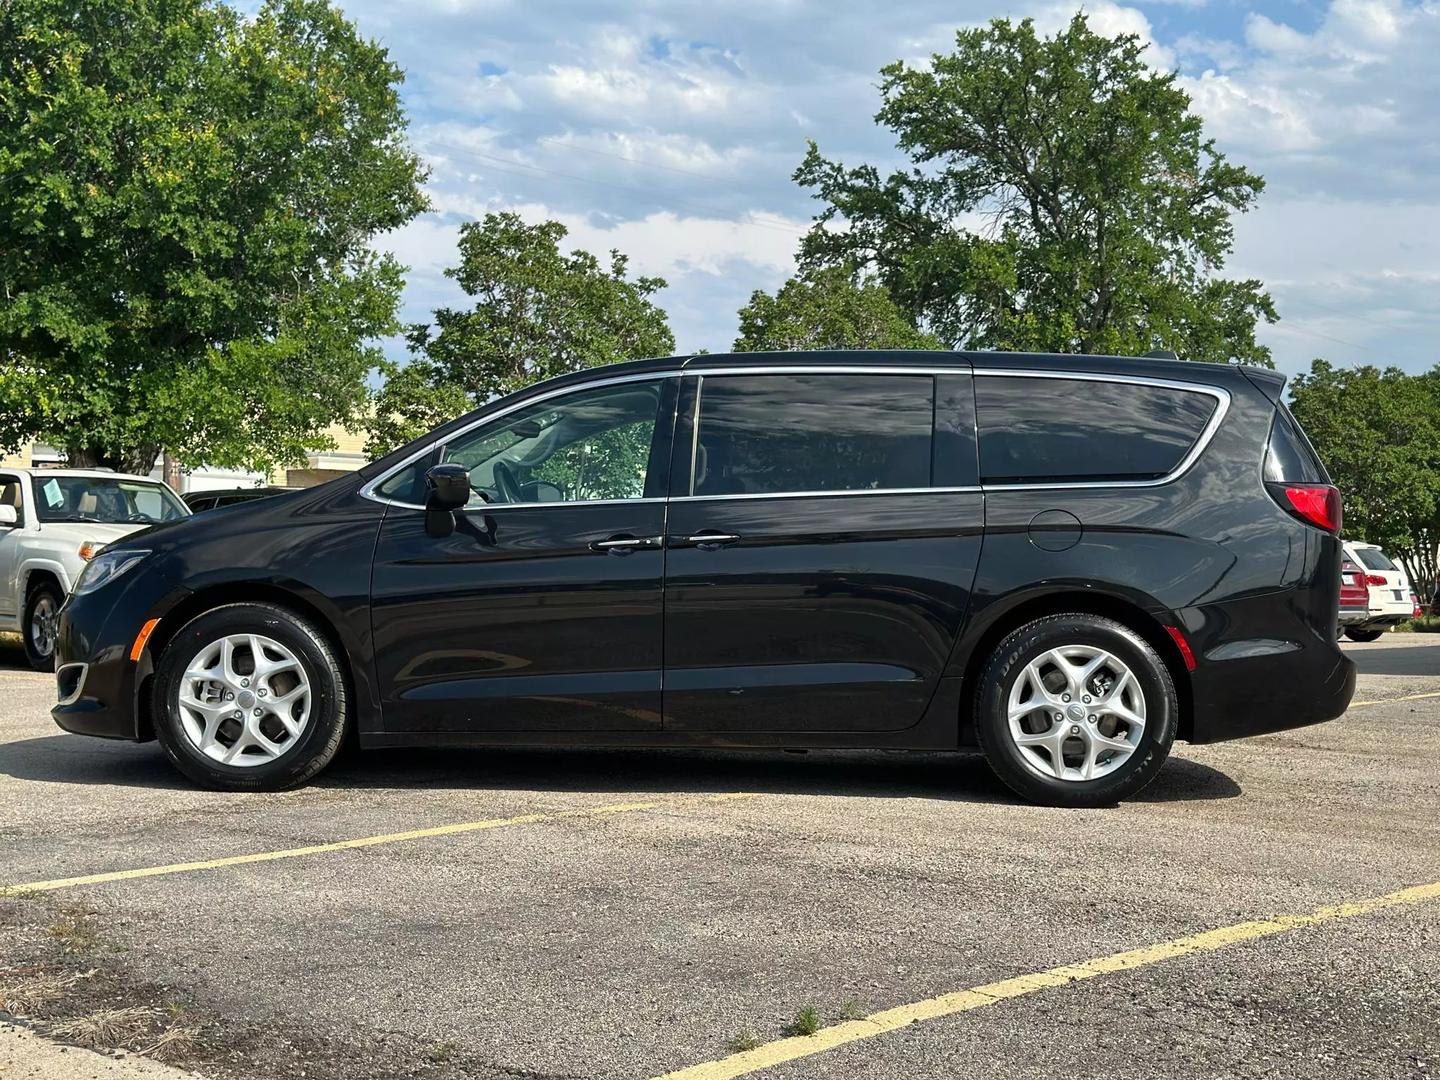 2017 Chrysler Pacifica - Image 4